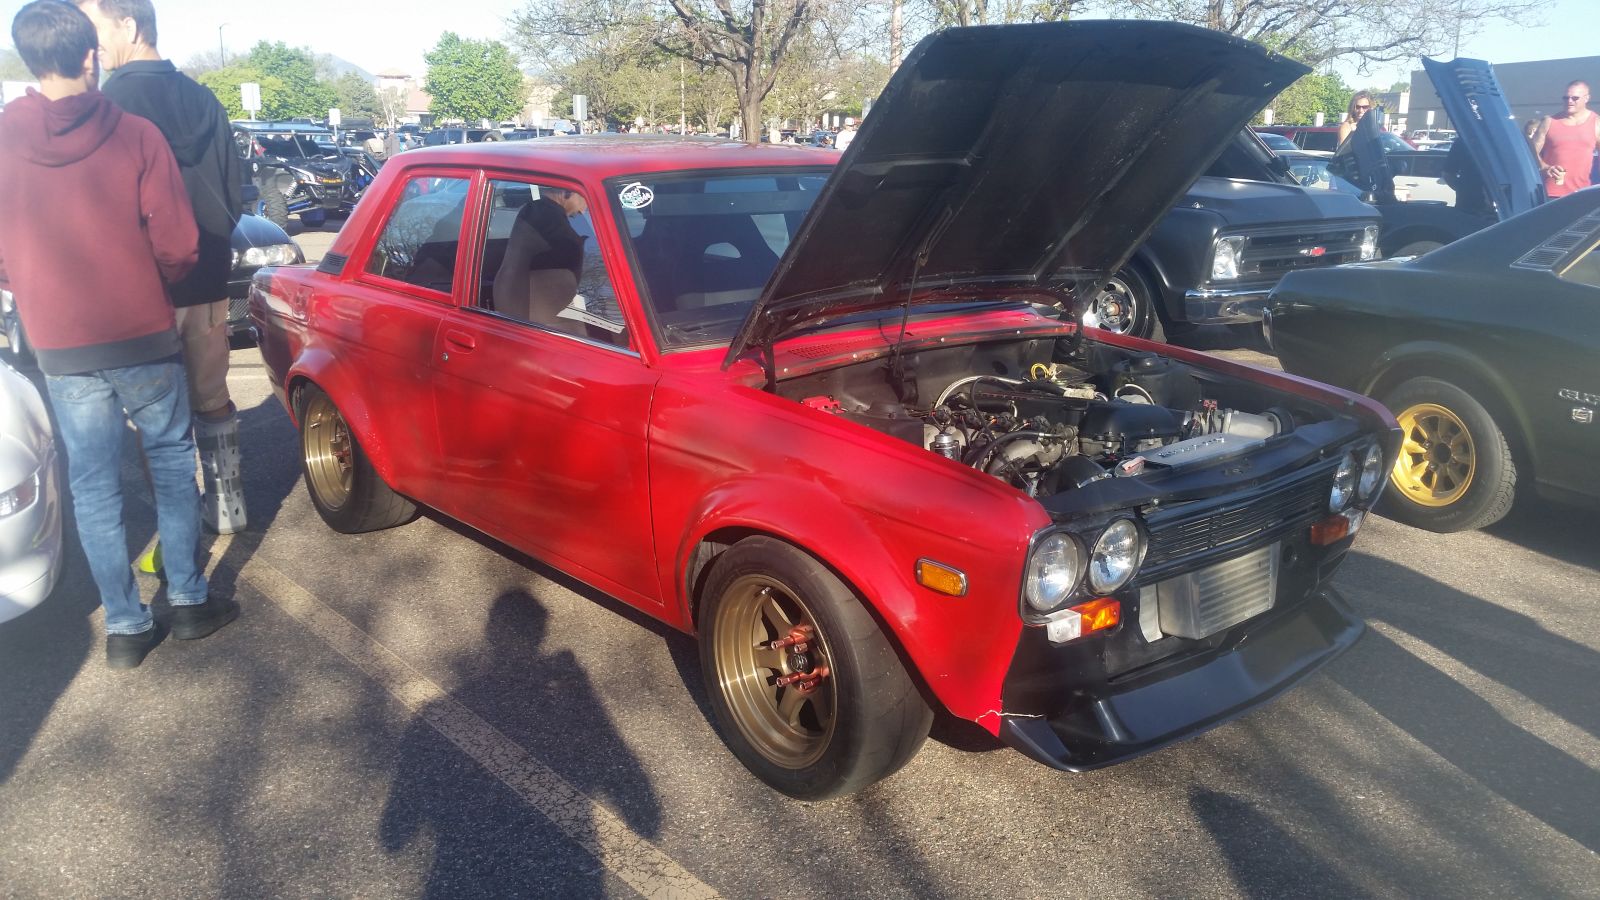 Datsun 510 with what looked like a turbo SR-20 under the hood